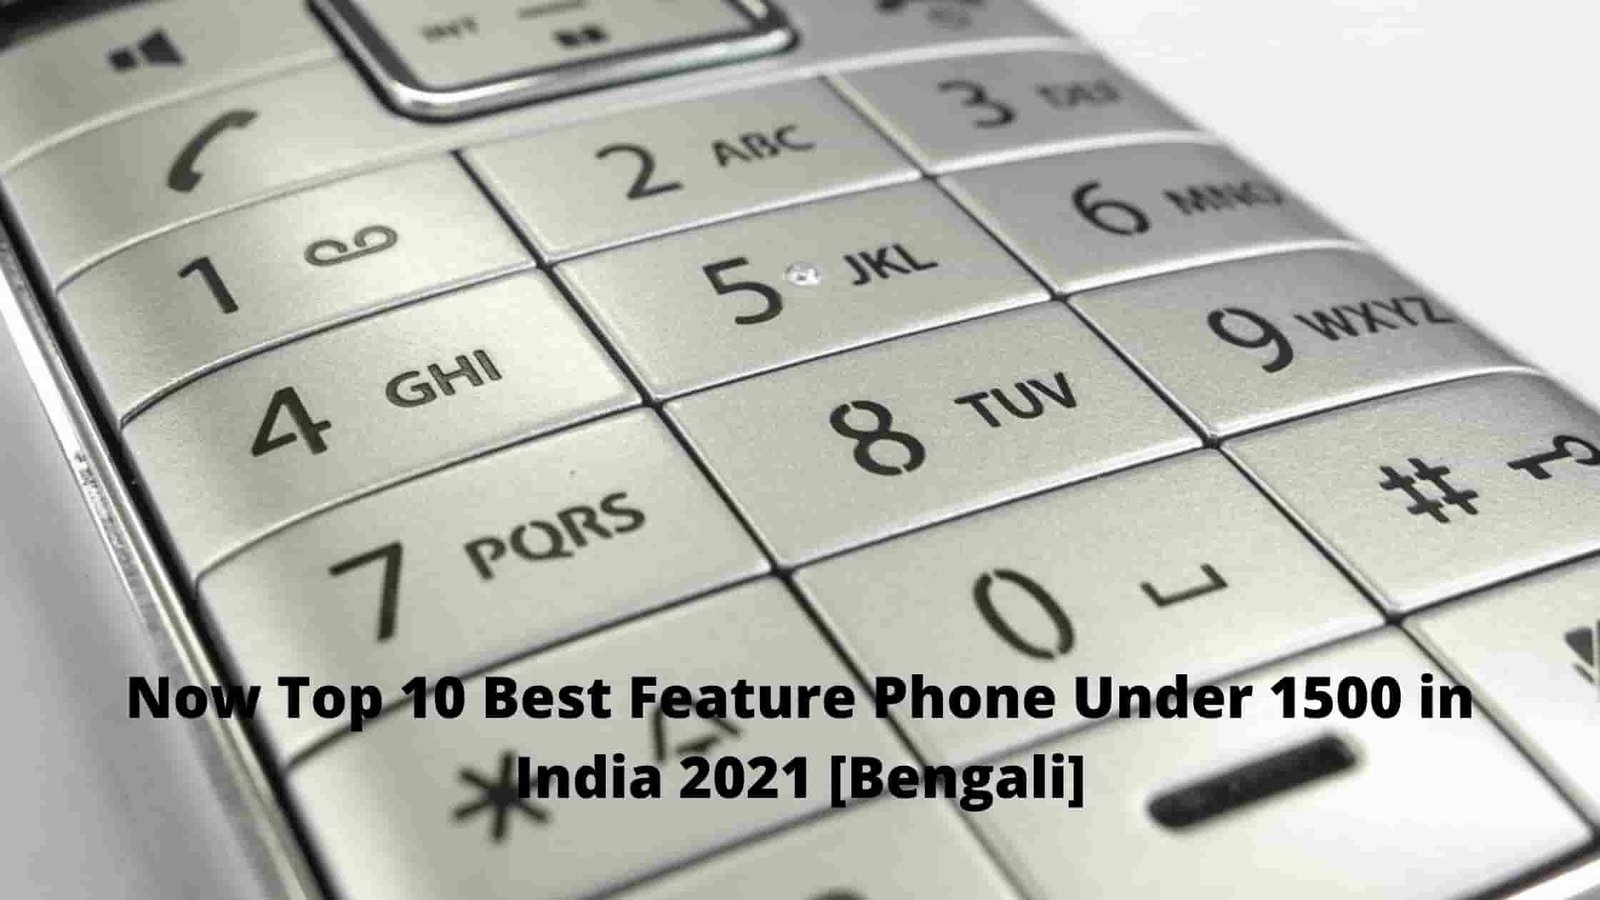 Now Top 10 Best Feature Phone Under 1500 in India 2021 [Bengali]